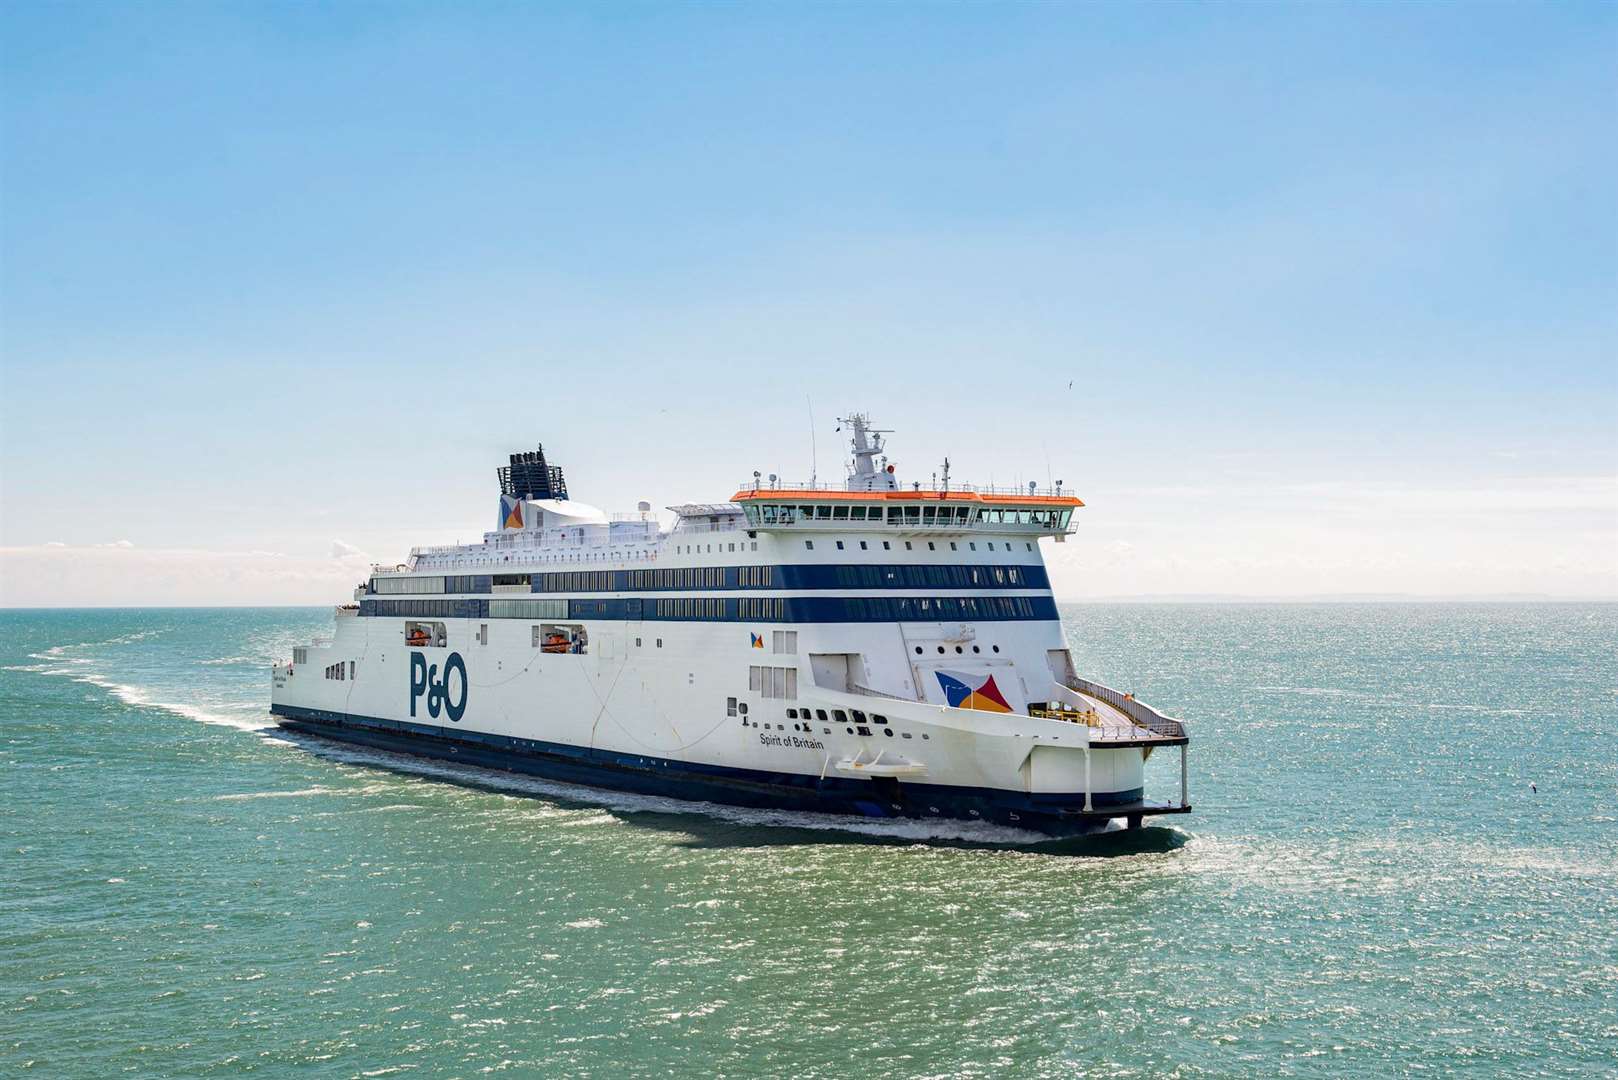 P&O Ferries has spent £230m on two new hybrid ships which they cannot charge at the docks